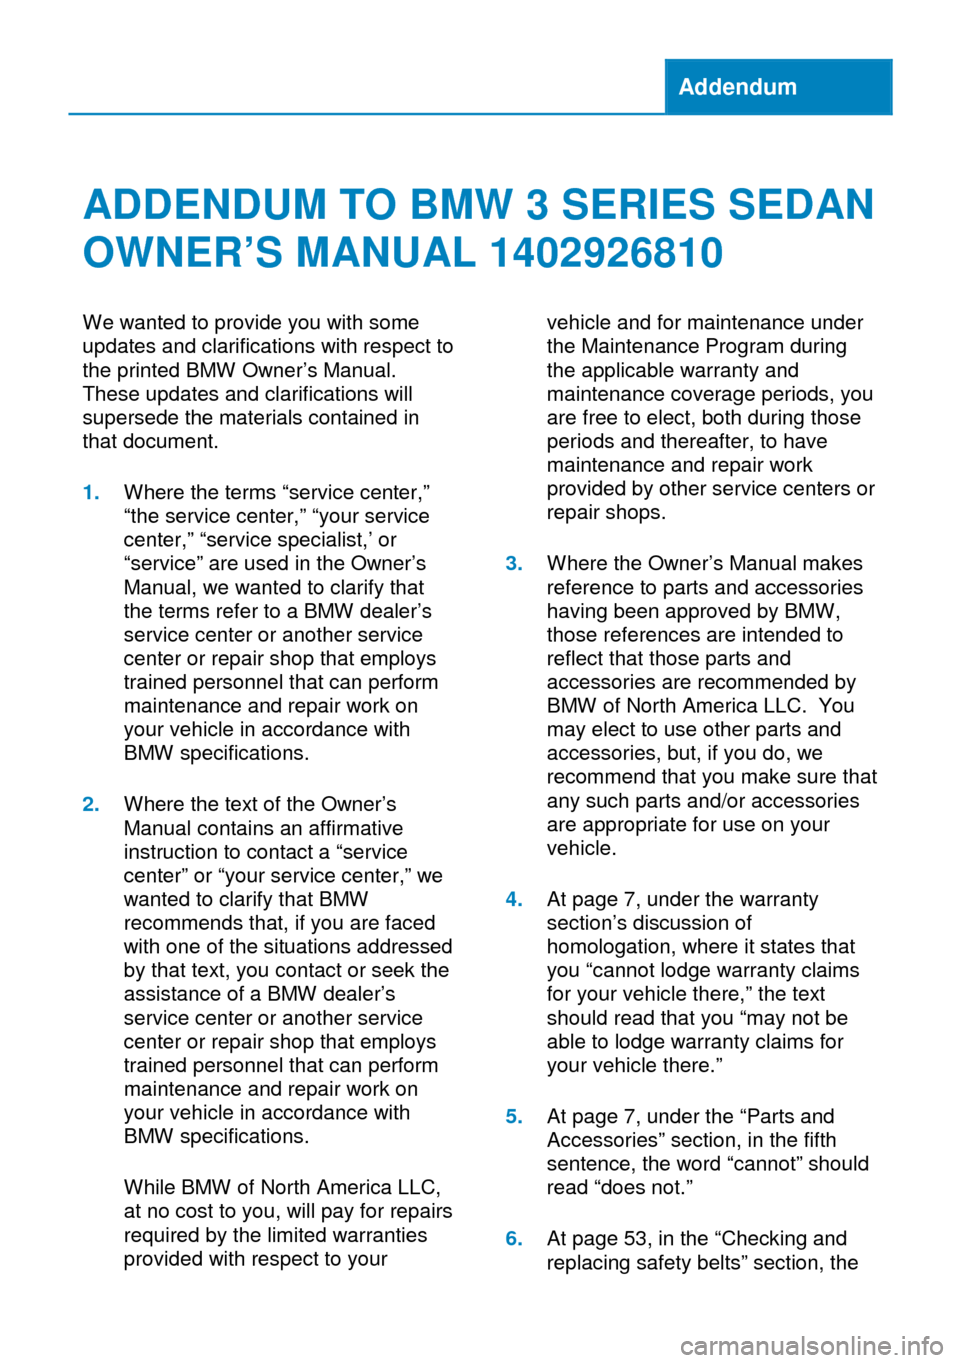 BMW 3 SERIES SEDAN 2013 F30 Owners Manual Addendum
ADDENDUM TO BMW 3 SERIES SEDAN
OWNER’S MANUAL 1402926810
We wanted to provide you with some
updates and clarifications with respect to
the printed BMW Owner’s Manual.
These updates and cl